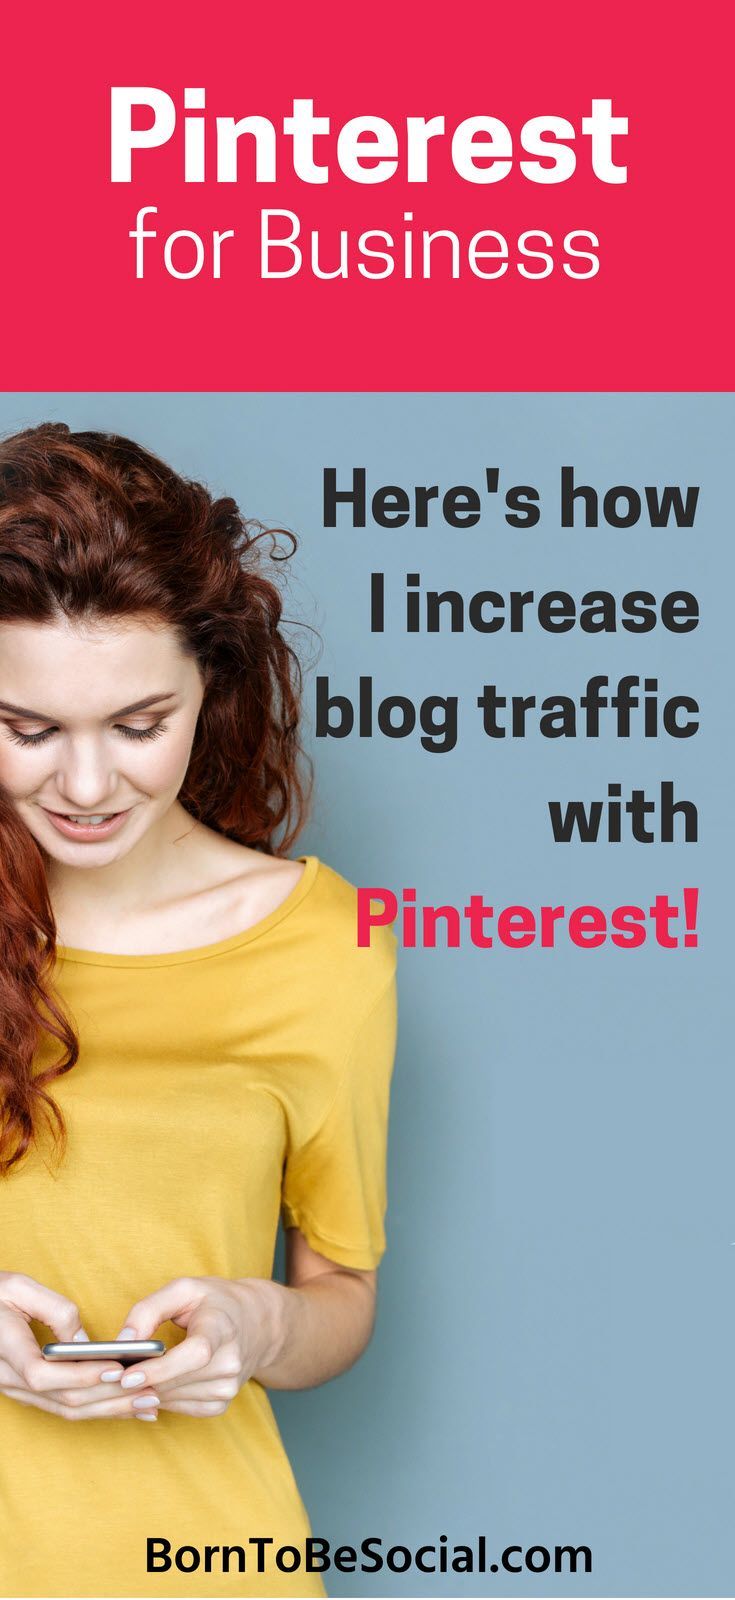 How to increase blog traffic with Pinterest – Here’s how to use Pinterest to drive traffic to your blog.  Increase your business visibility and number of visitors to your #blog and your website! | Mary Lumley | #BornToBeSocial #Pinterest Marketing & Consulting